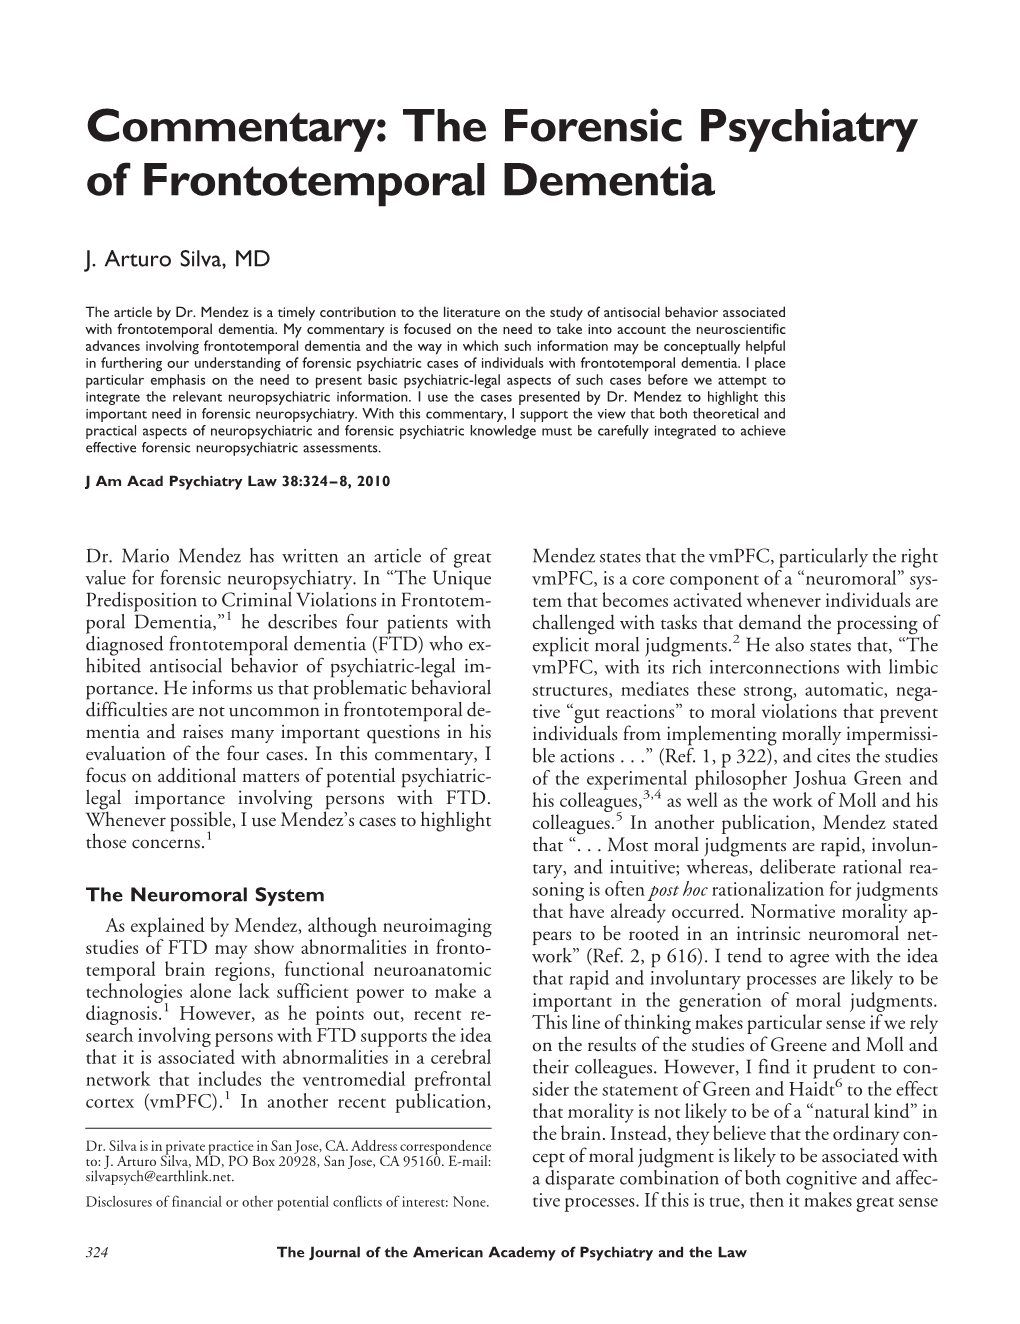 The Forensic Psychiatry of Frontotemporal Dementia